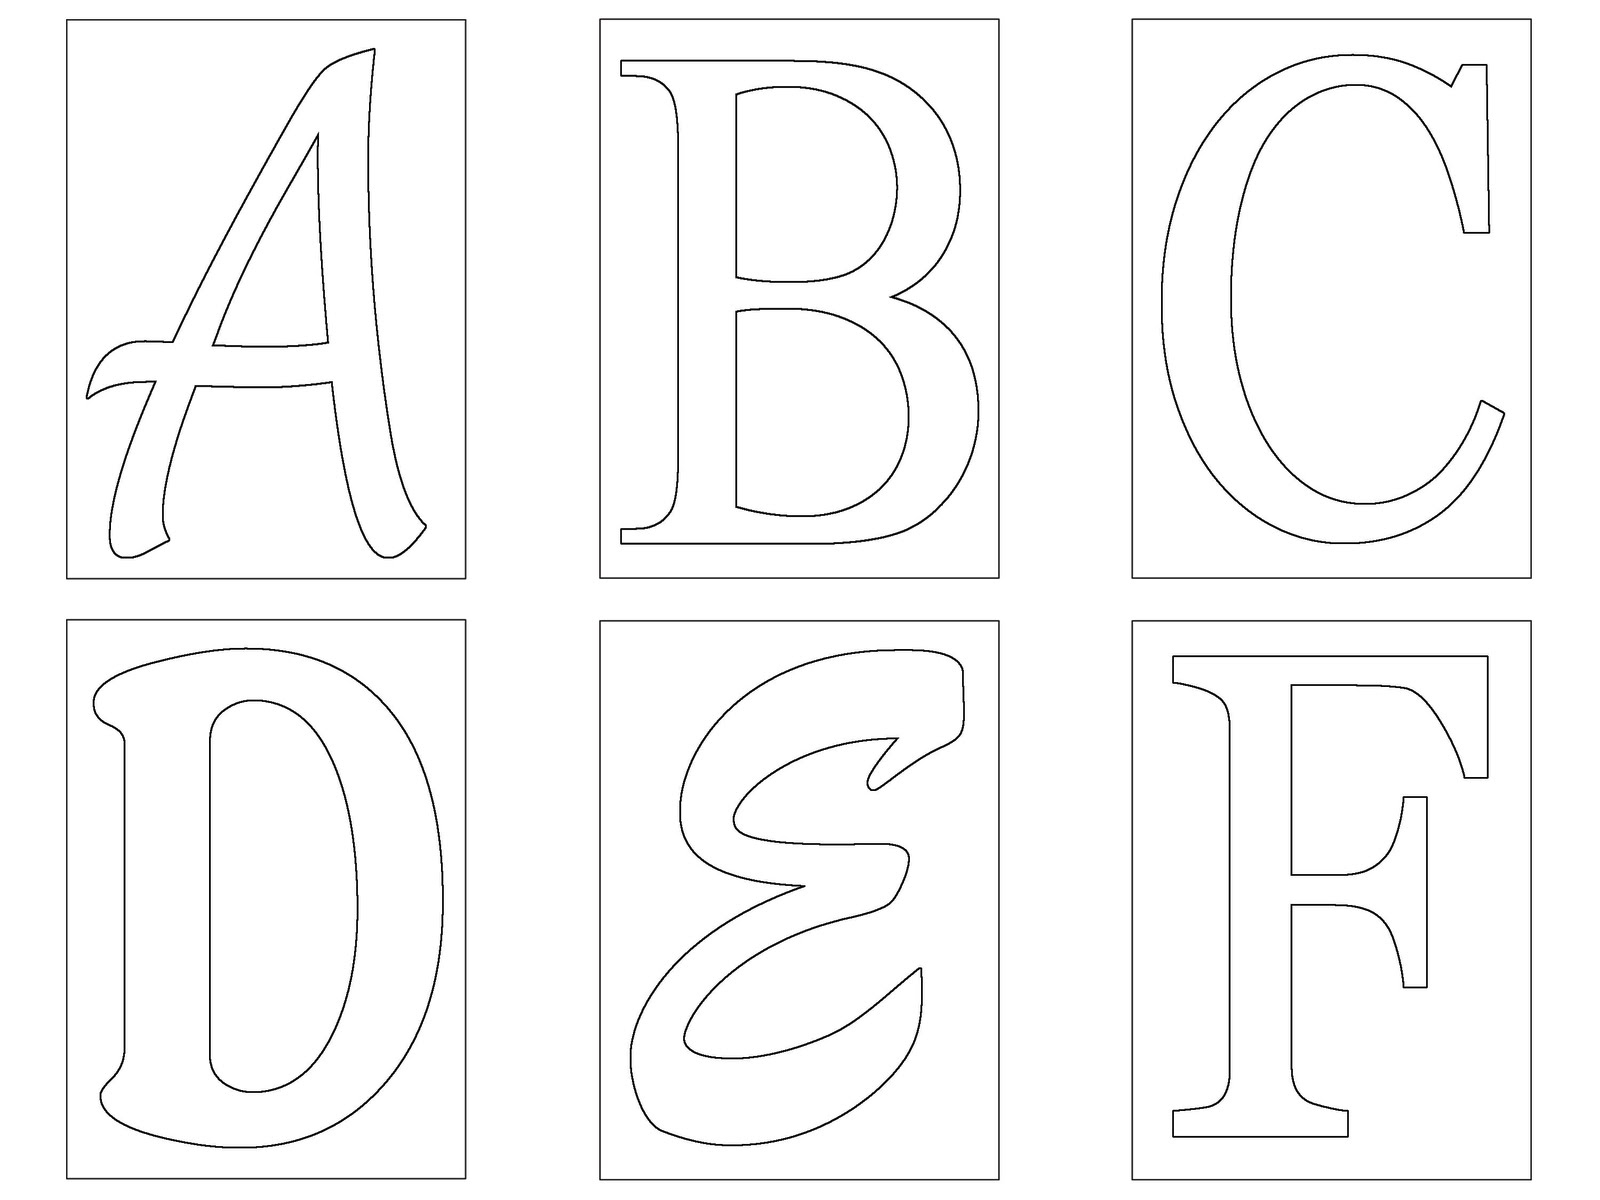 Free Letters To Print And Cut Out - 1000 Ideas About pertaining to Large Letter Templates